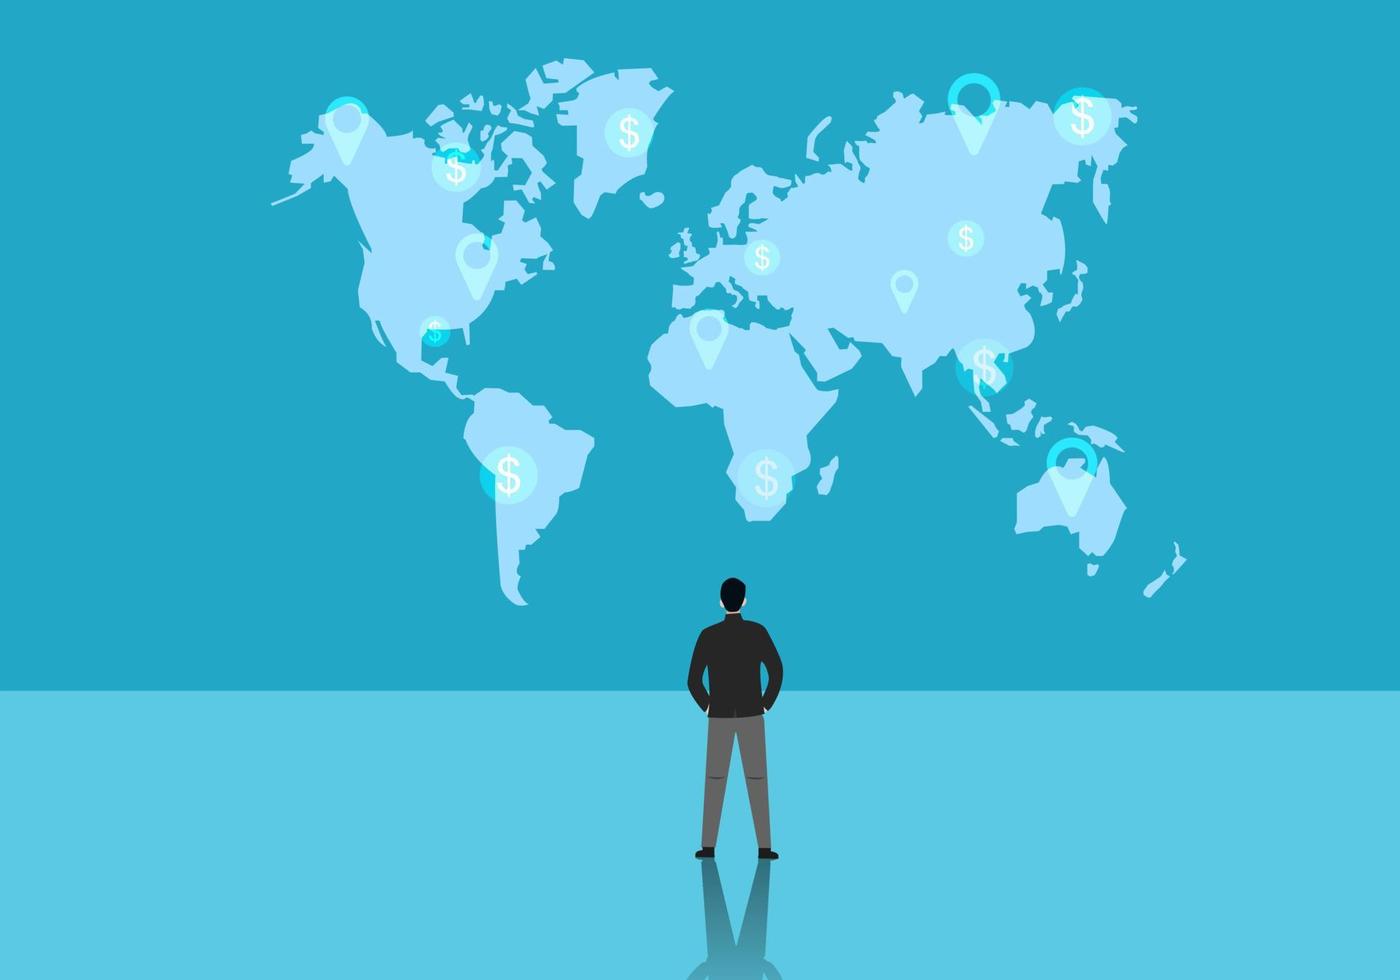 Business people planning business stand in front of the world map with the goal of expanding the business around the world and growing vector